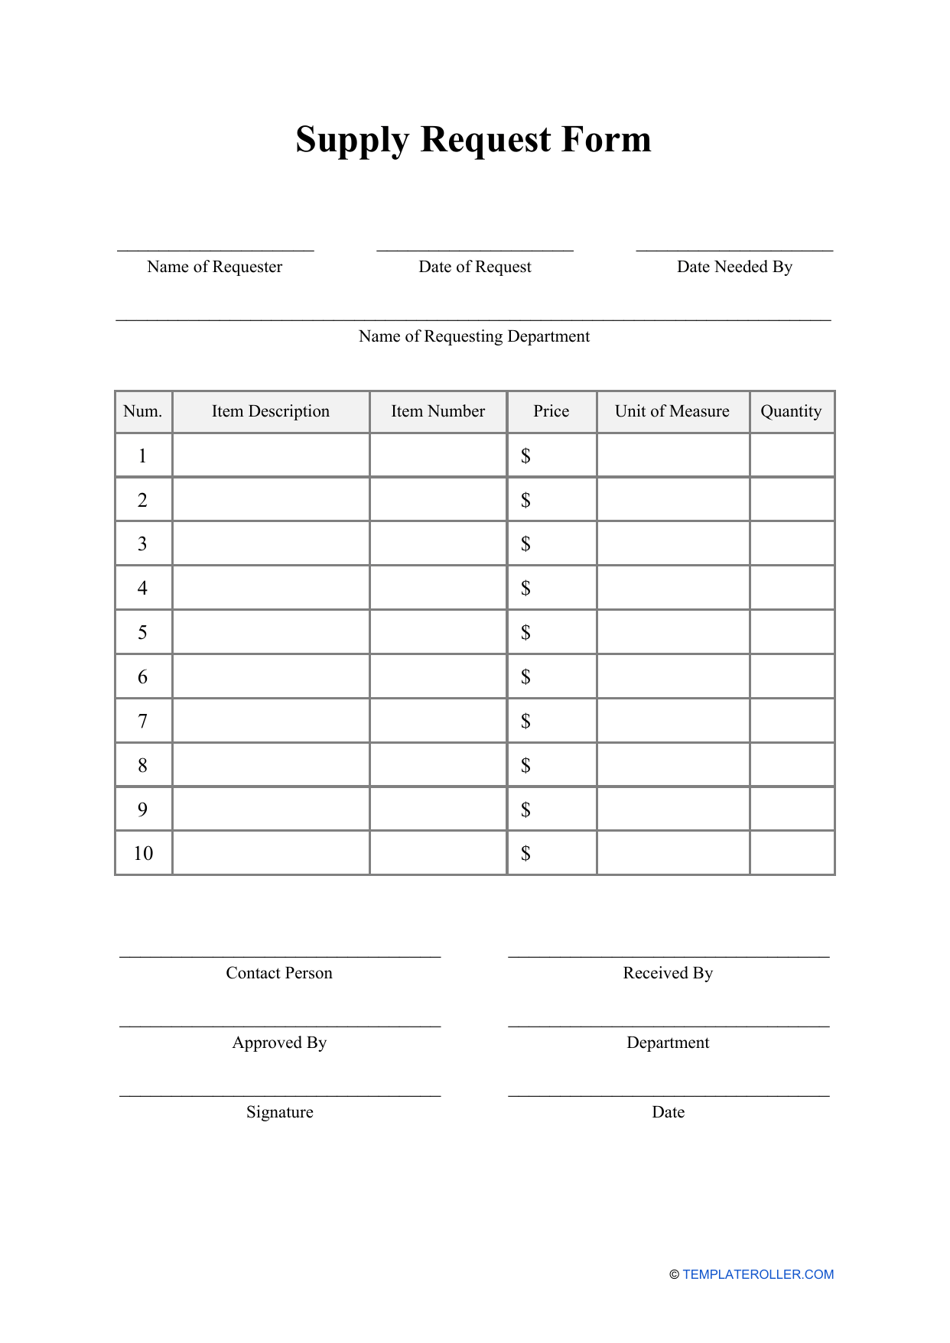 printable-inventory-request-form-printable-forms-free-online